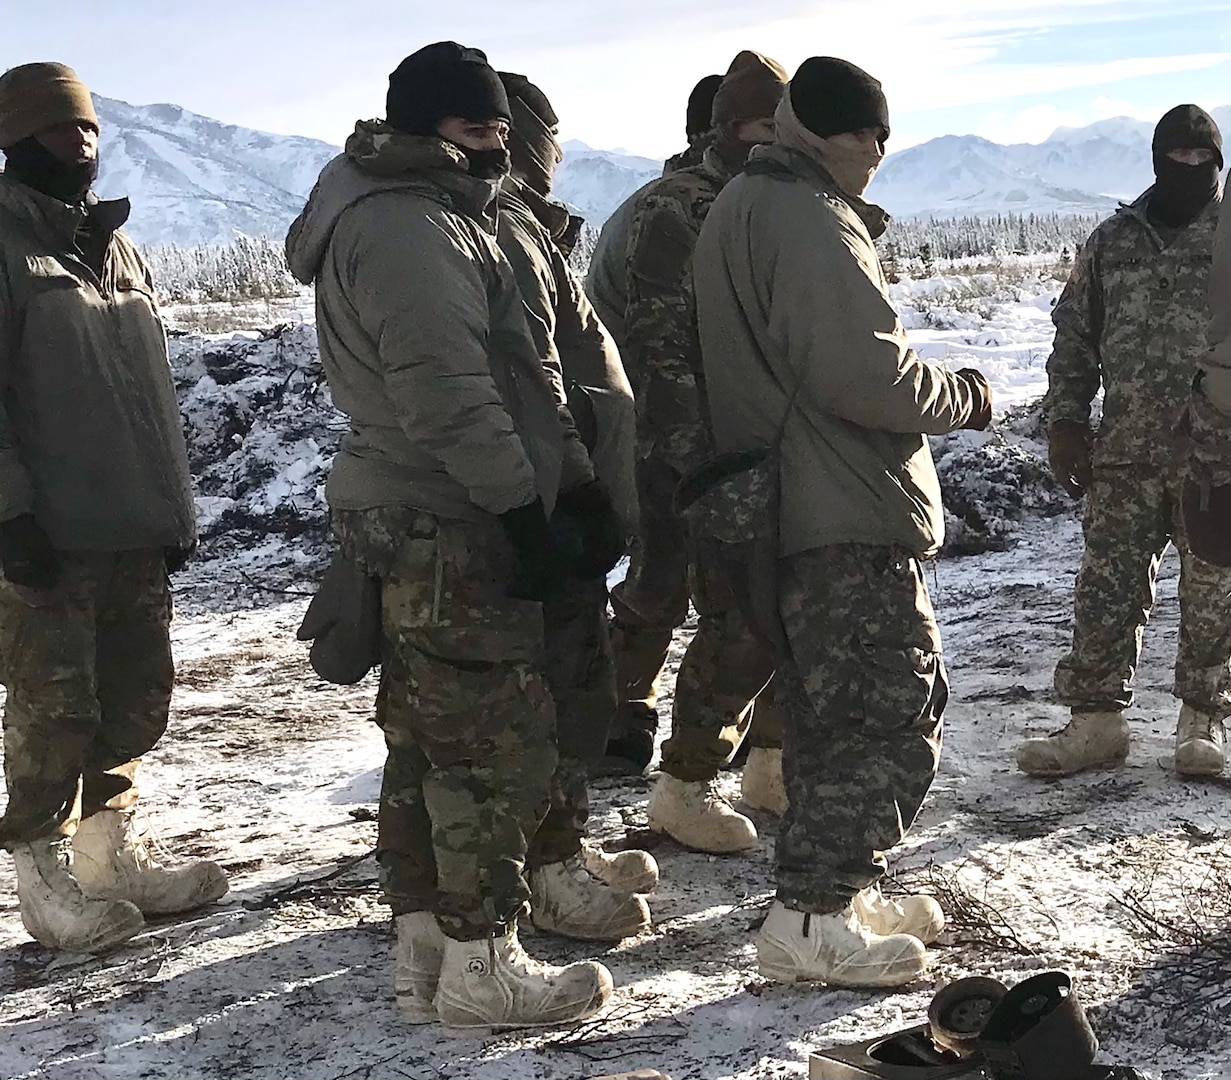 A Role 1 medic from 4th Brigade 25th Infantry Division and Master Sgt. David Edwards collect information from line medic and Role 1 perspective at Fort Greely, Alaska, in order to resolve Arctic warfare gaps, enhance readiness, and inform modernization.